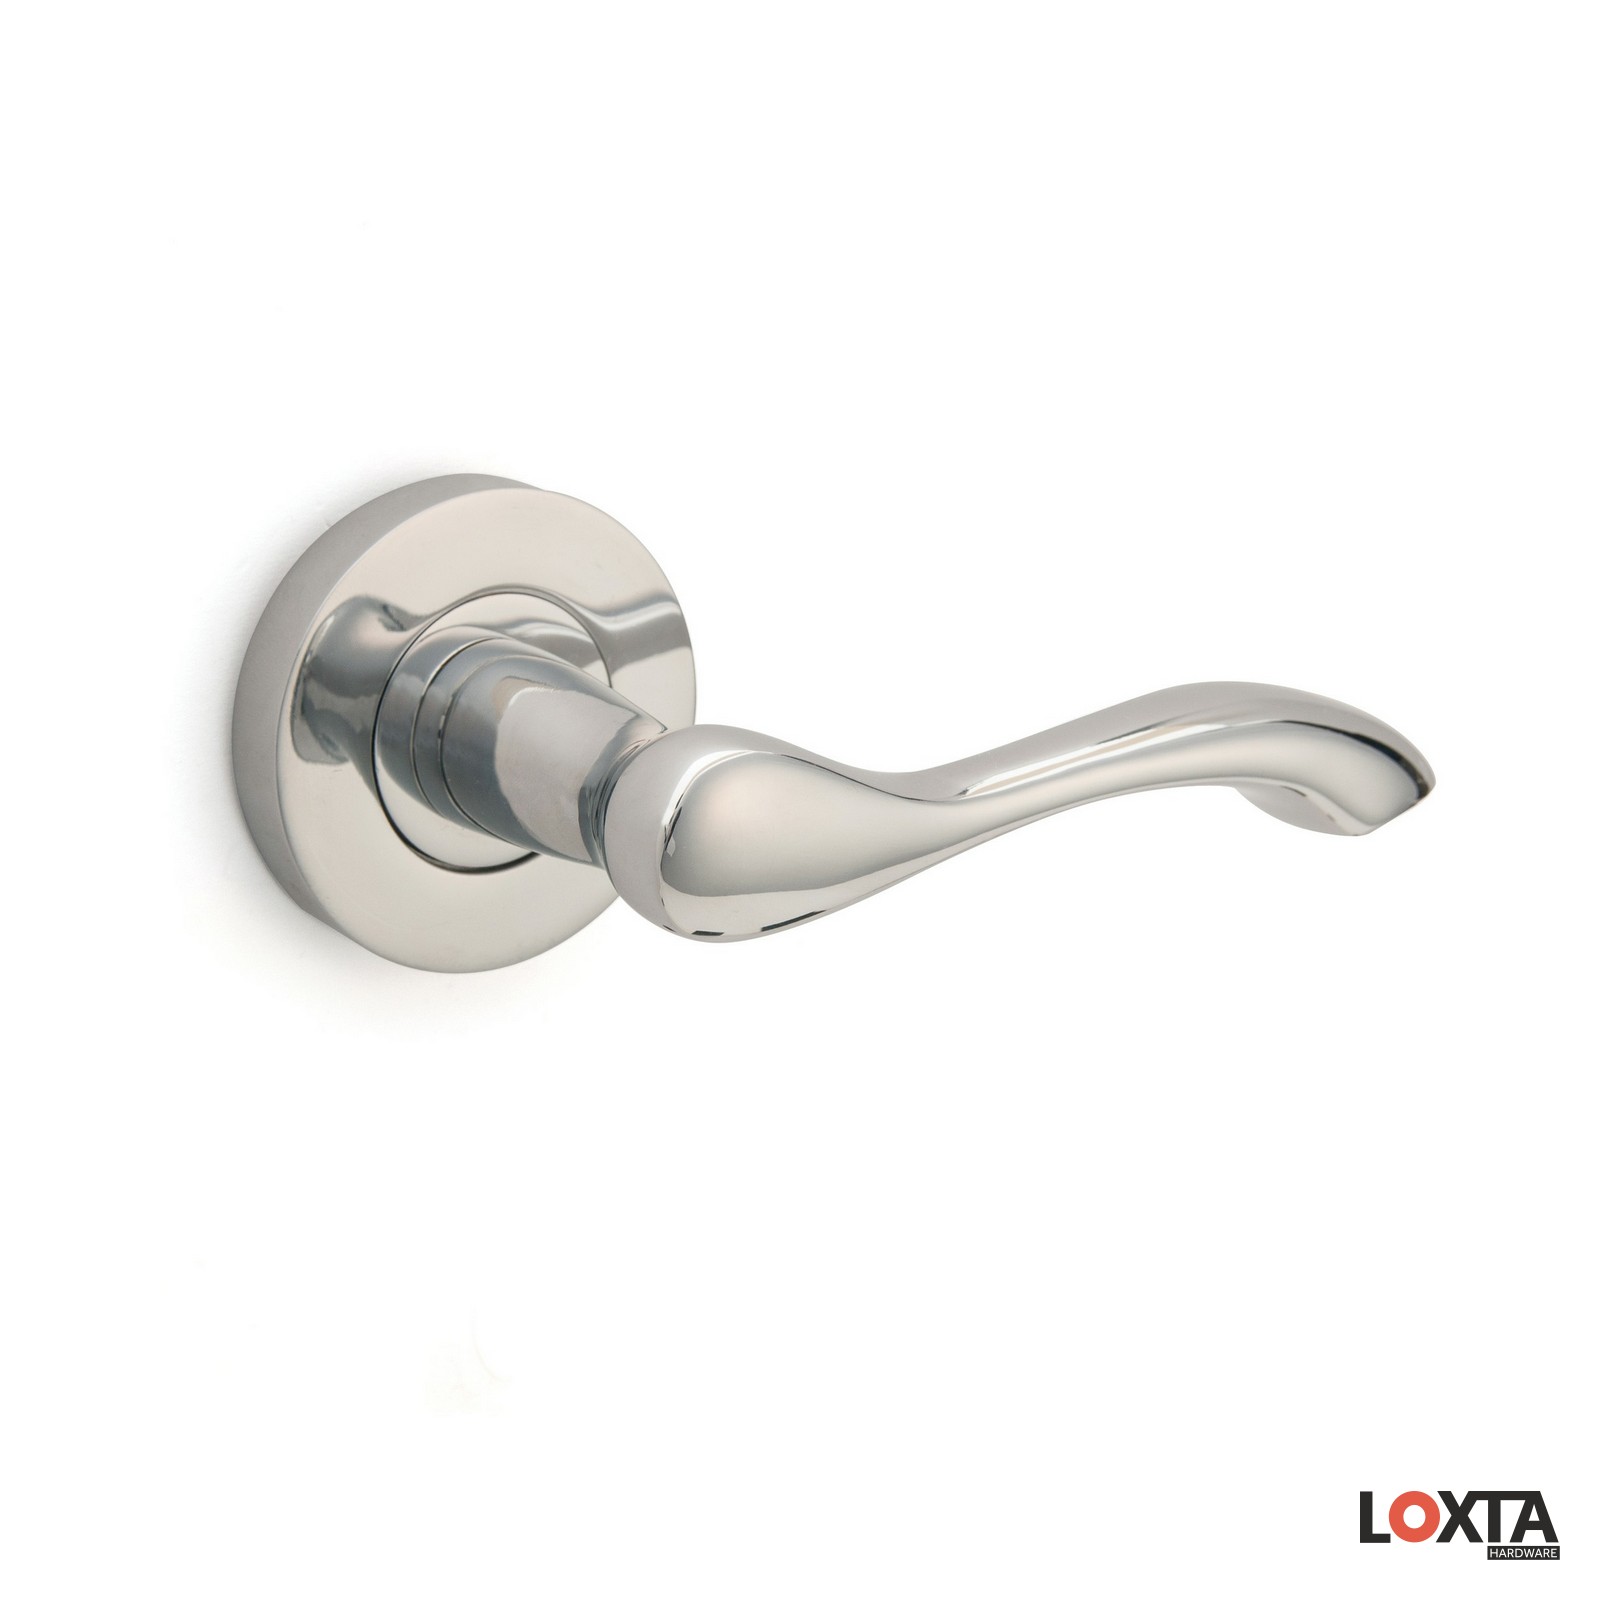 LT30510 Sola Door Handle on Round Rose, Hot Forged